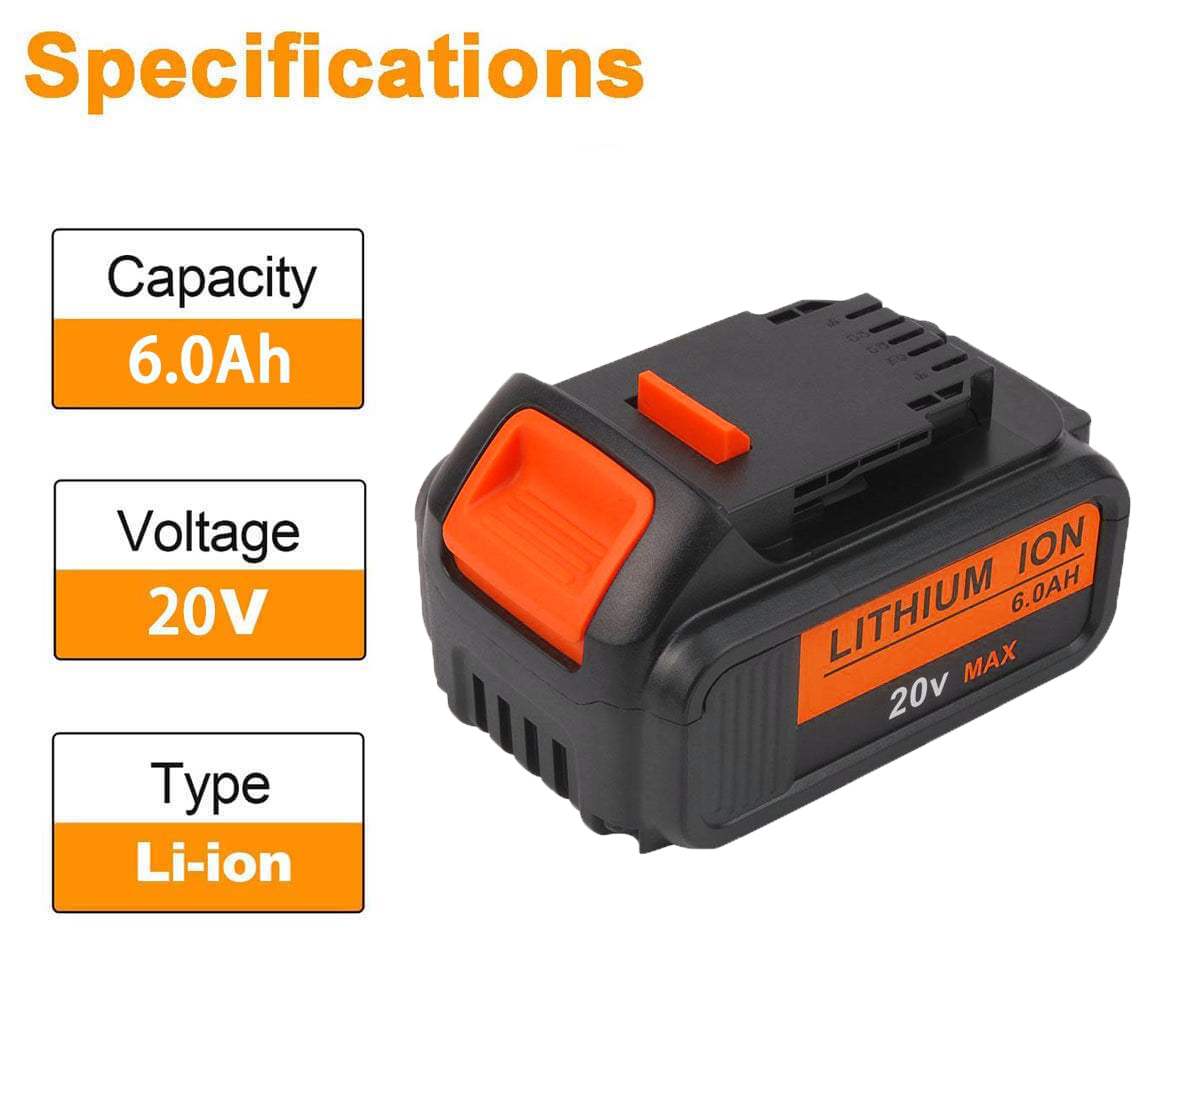 For DeWalt DCB200 20V Max Battery Replacement | Li-ion Battery 6.0Ah